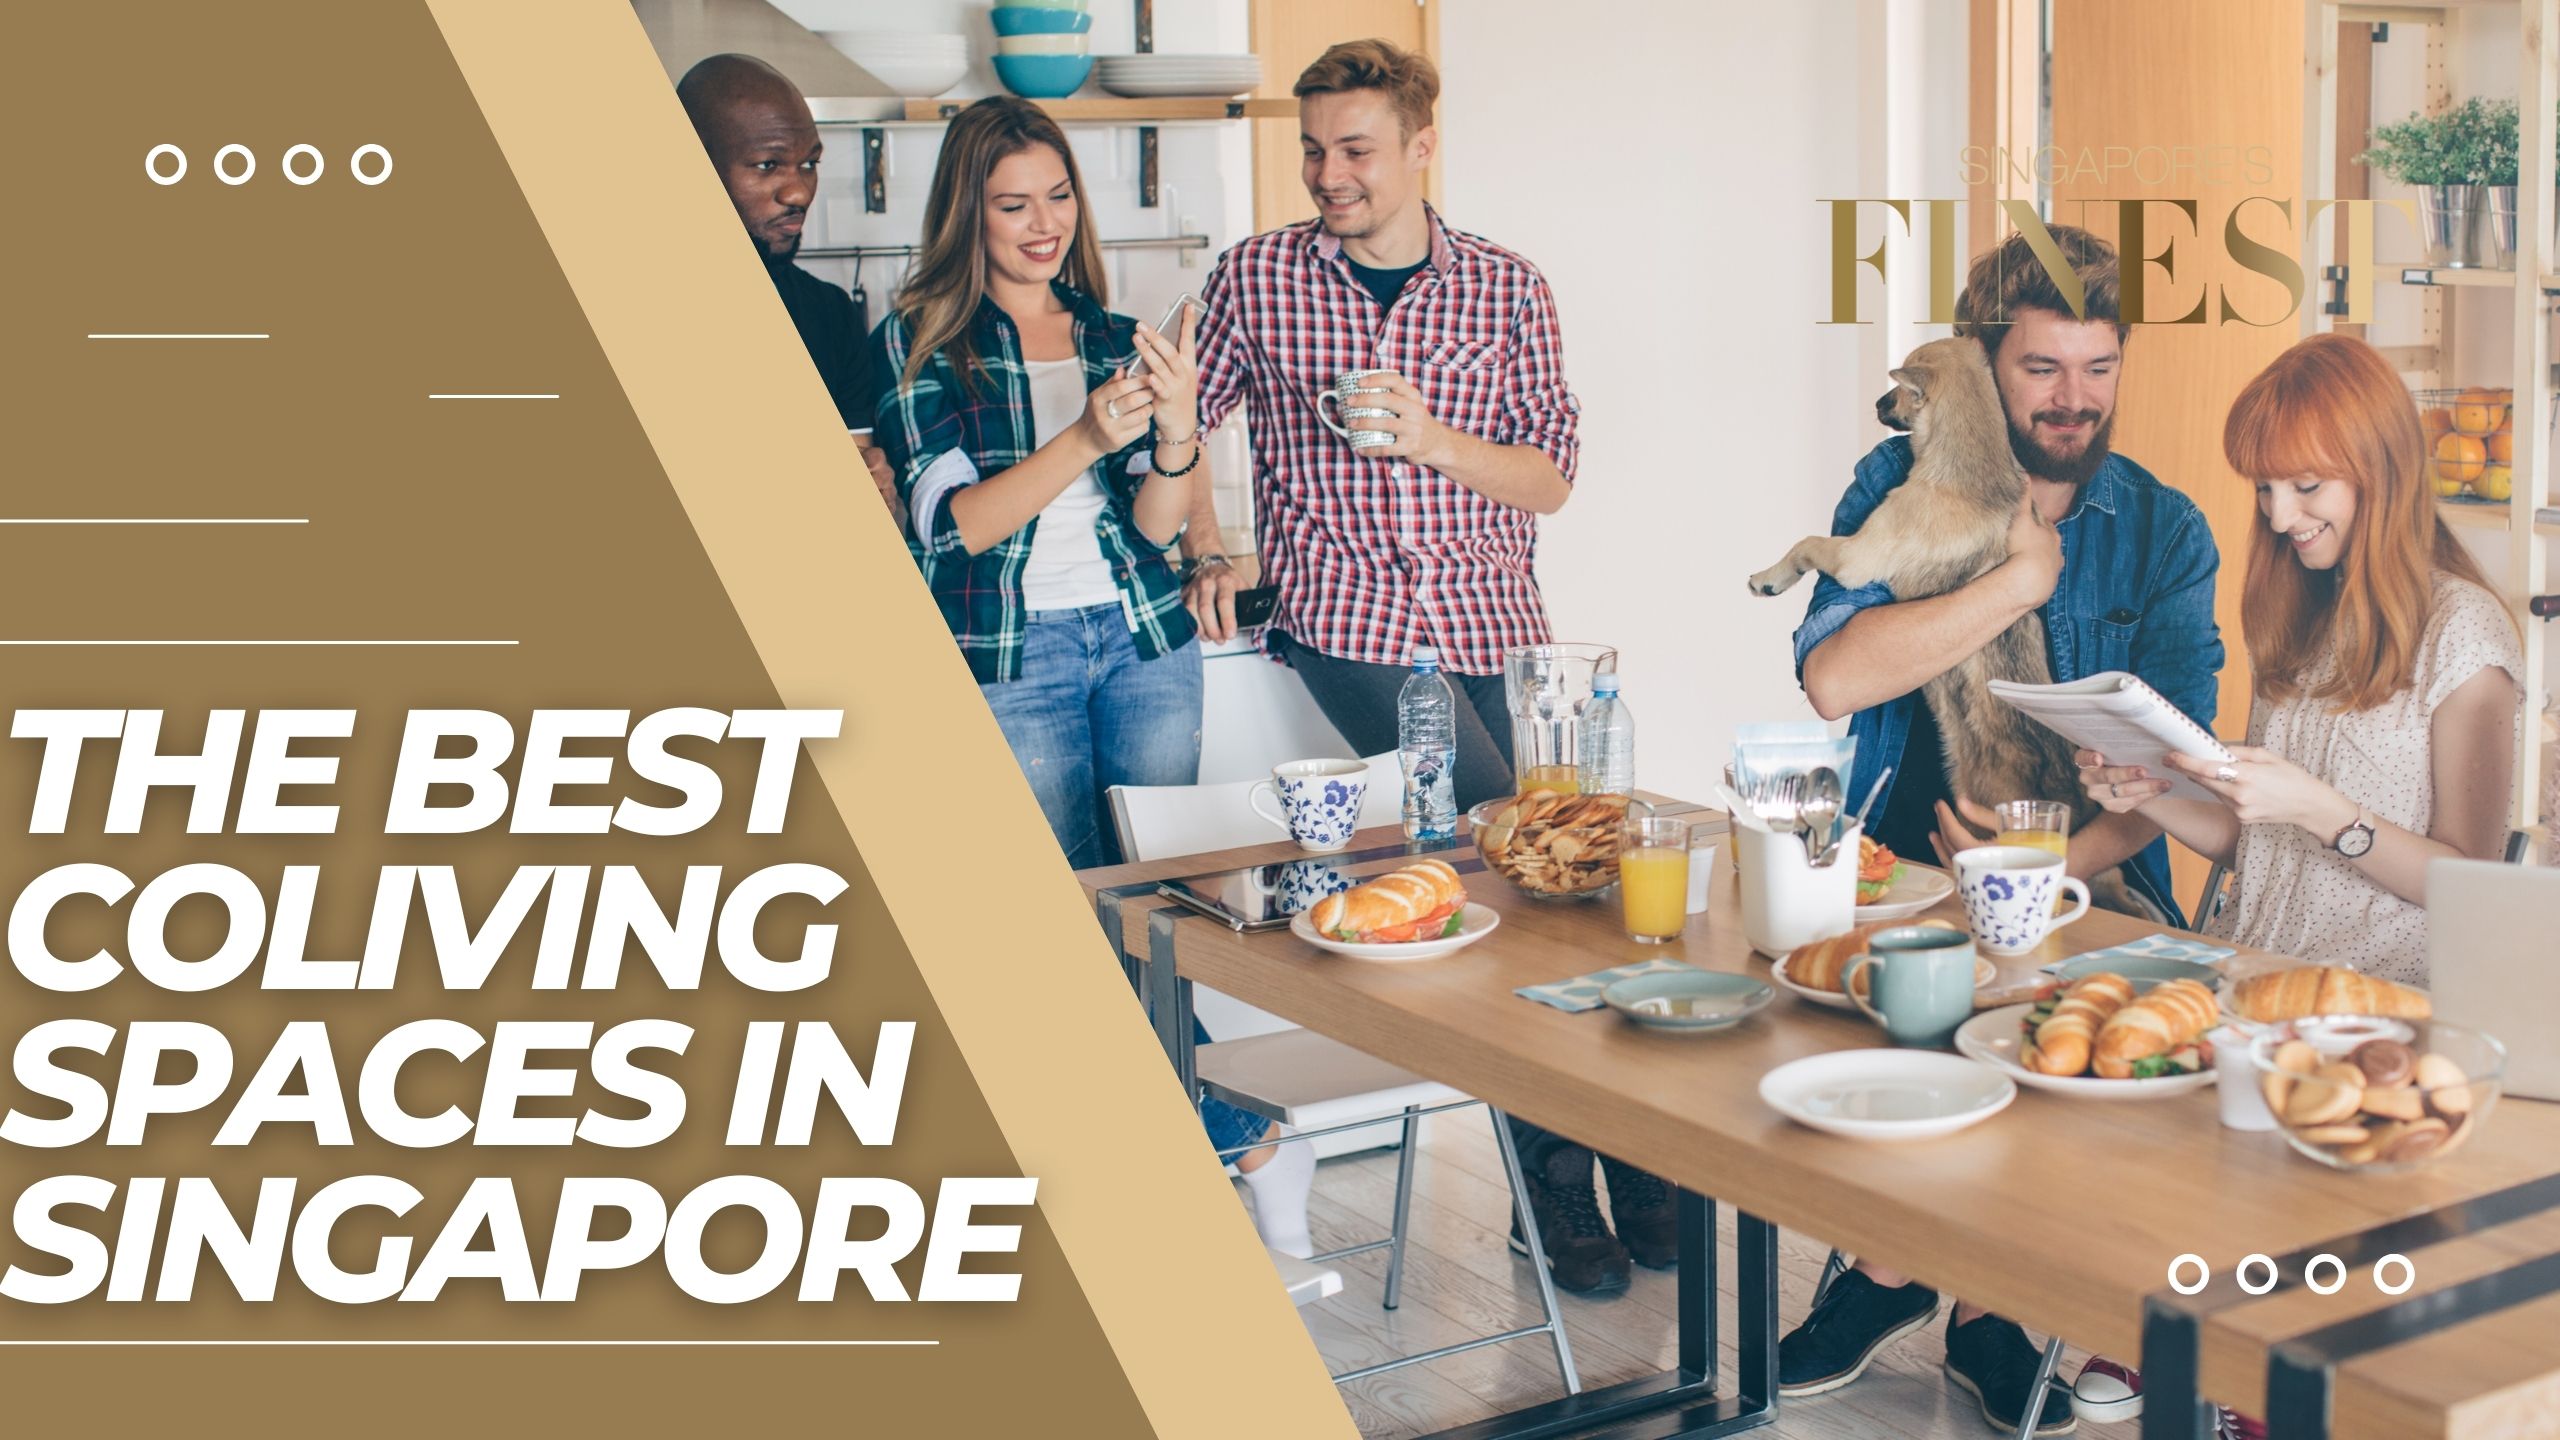 The Finest Coliving Spaces in Singapore